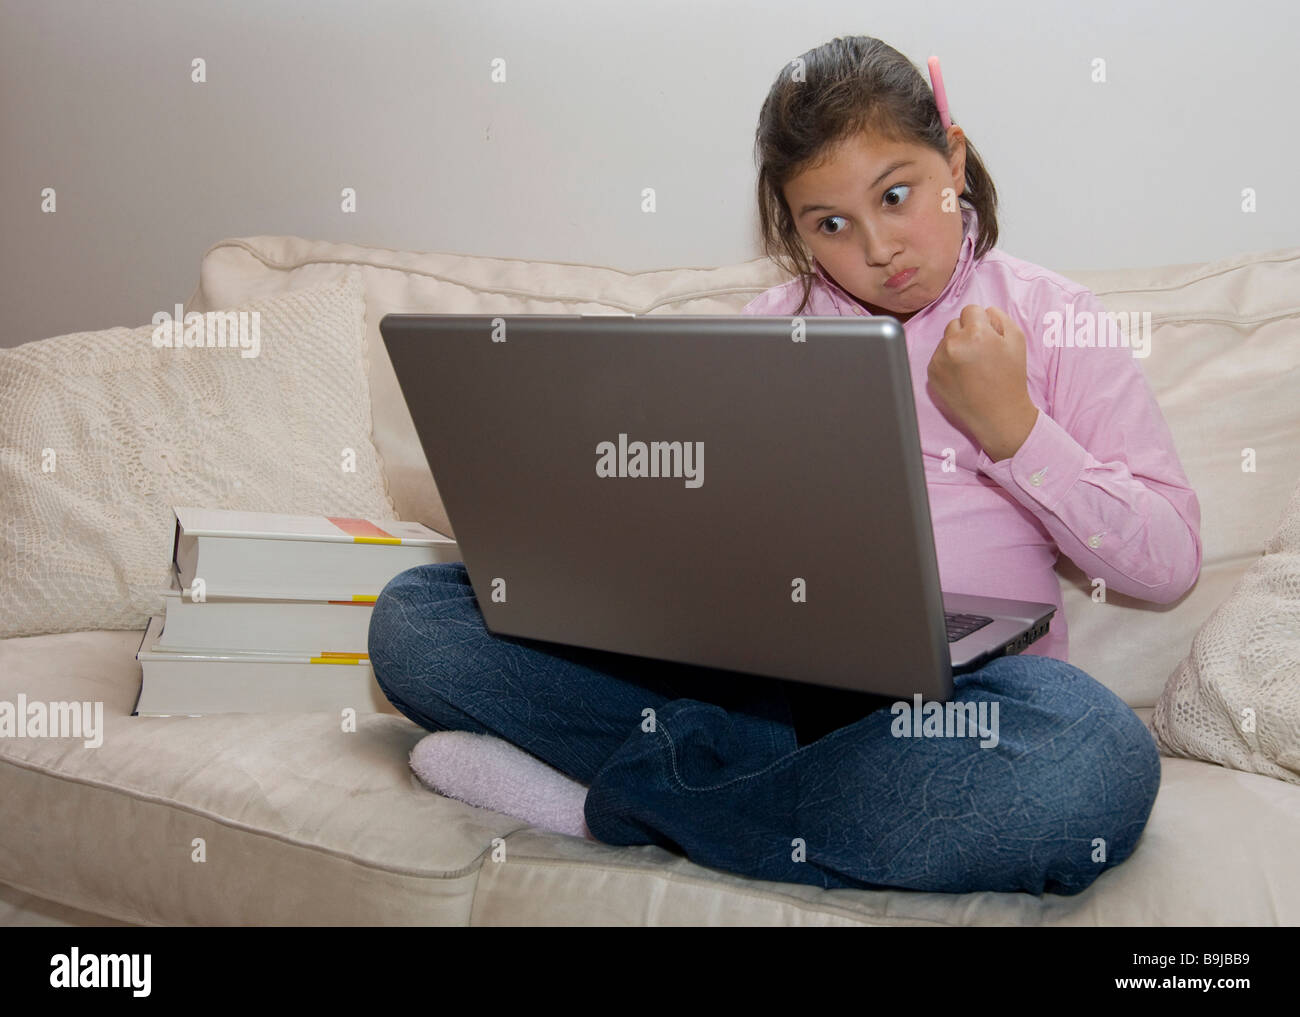 Student, approx. 11 years old, working on a laptop is getting angry Stock Photo